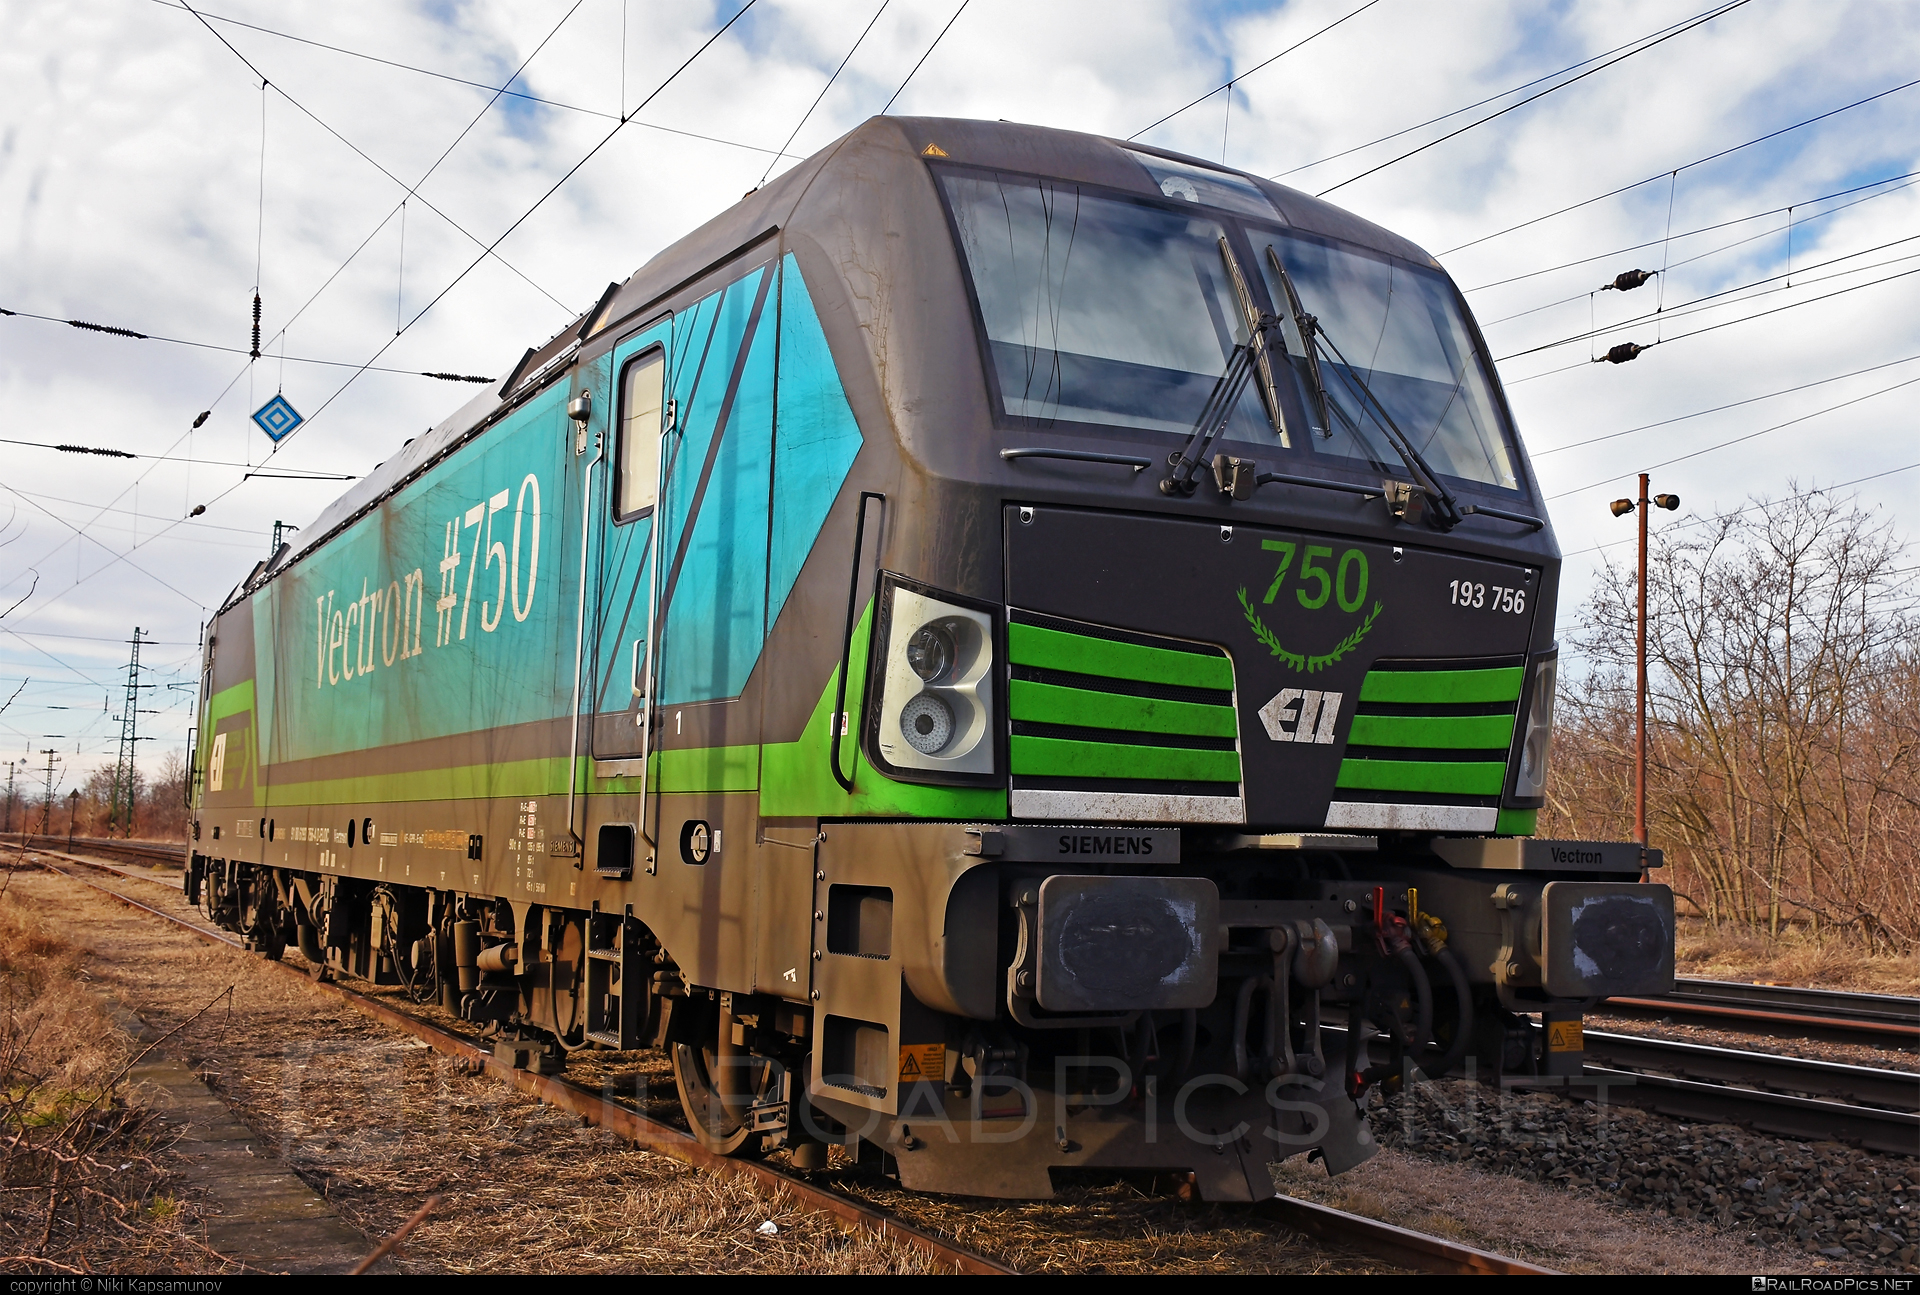 Siemens Vectron MS - 193 756 operated by RTB Cargo GmbH #ell #ellgermany #eloc #europeanlocomotiveleasing #rtb #rtbcargo #siemens #siemensVectron #siemensVectronMS #vectron #vectronMS